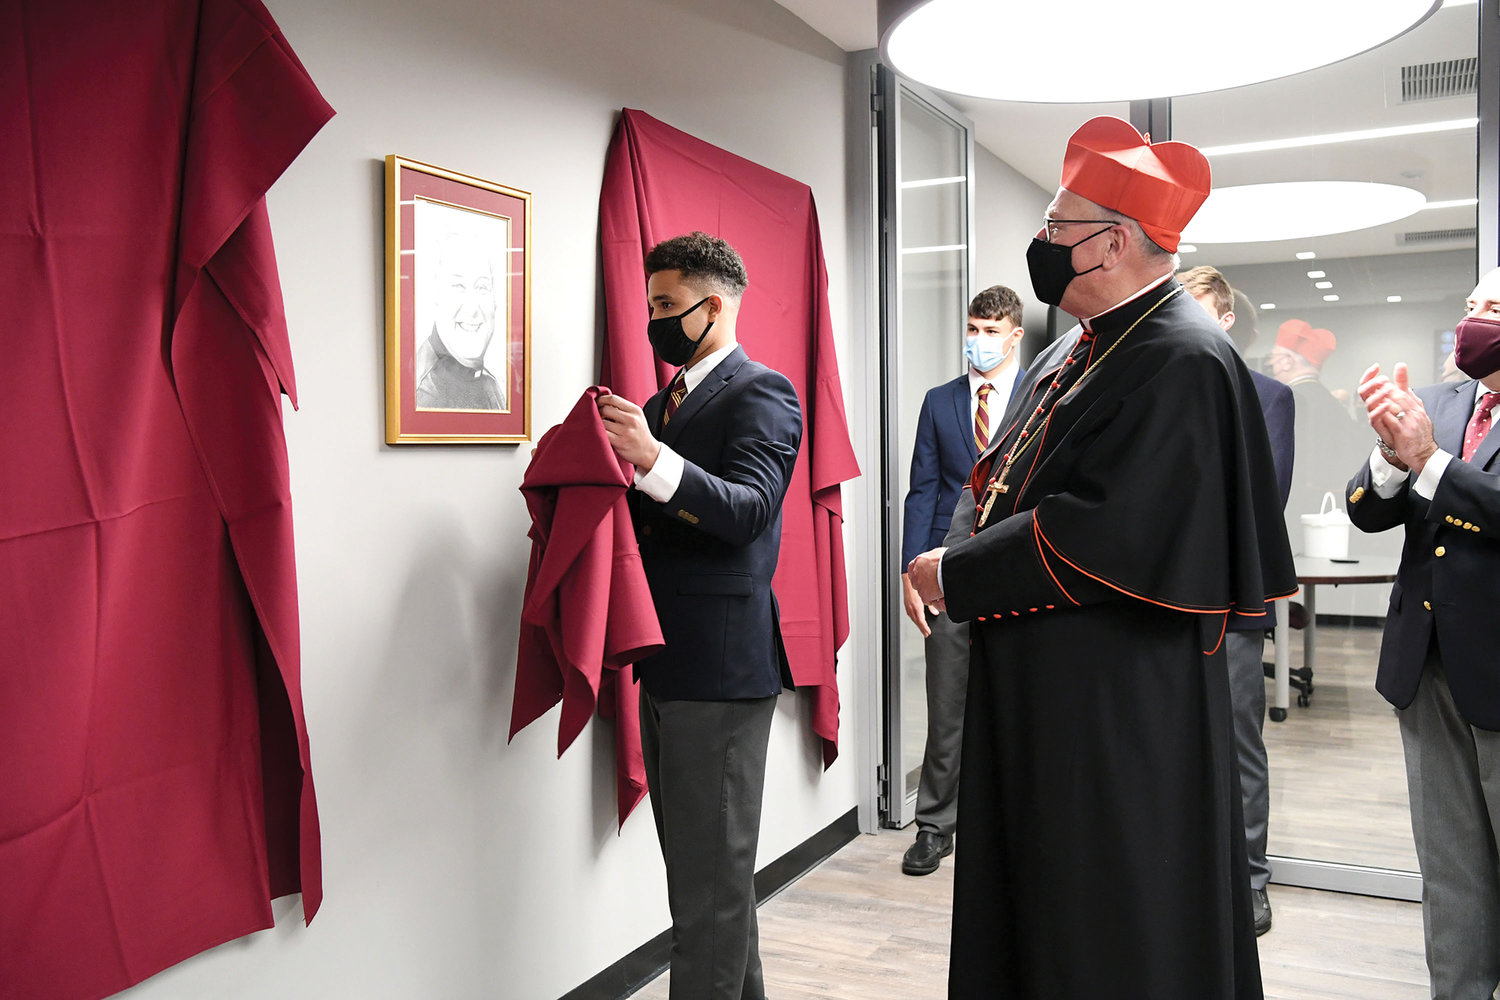 Msgr. Farrell High School student artist Christopher Jefairjian unveils his pencil drawing of Brother Henry S. Wright, C.F.C., during Cardinal Dolan’s visit to the Staten Island high school Oct. 28 to dedicate new campus facilities, including the Brother Henry S. Wright Learning Center. Brother Wright, who died Oct. 29, 2017, taught at Msgr. Farrell for 43 years.